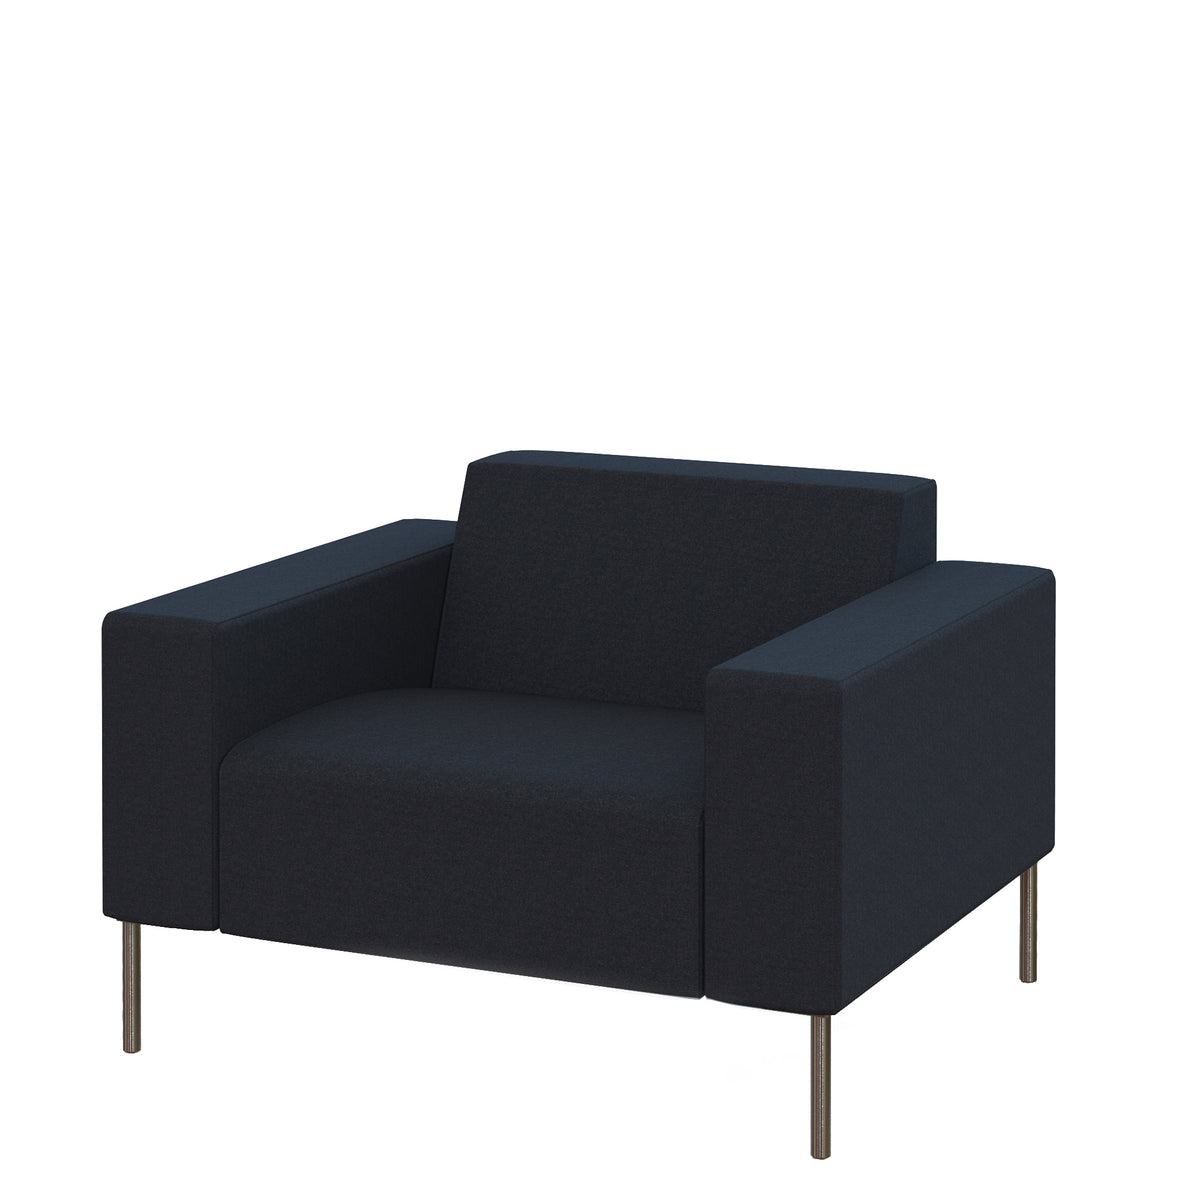 Hitch Mylius HM18 Origin Armchair Brushed Stainless Steel Legs Tower